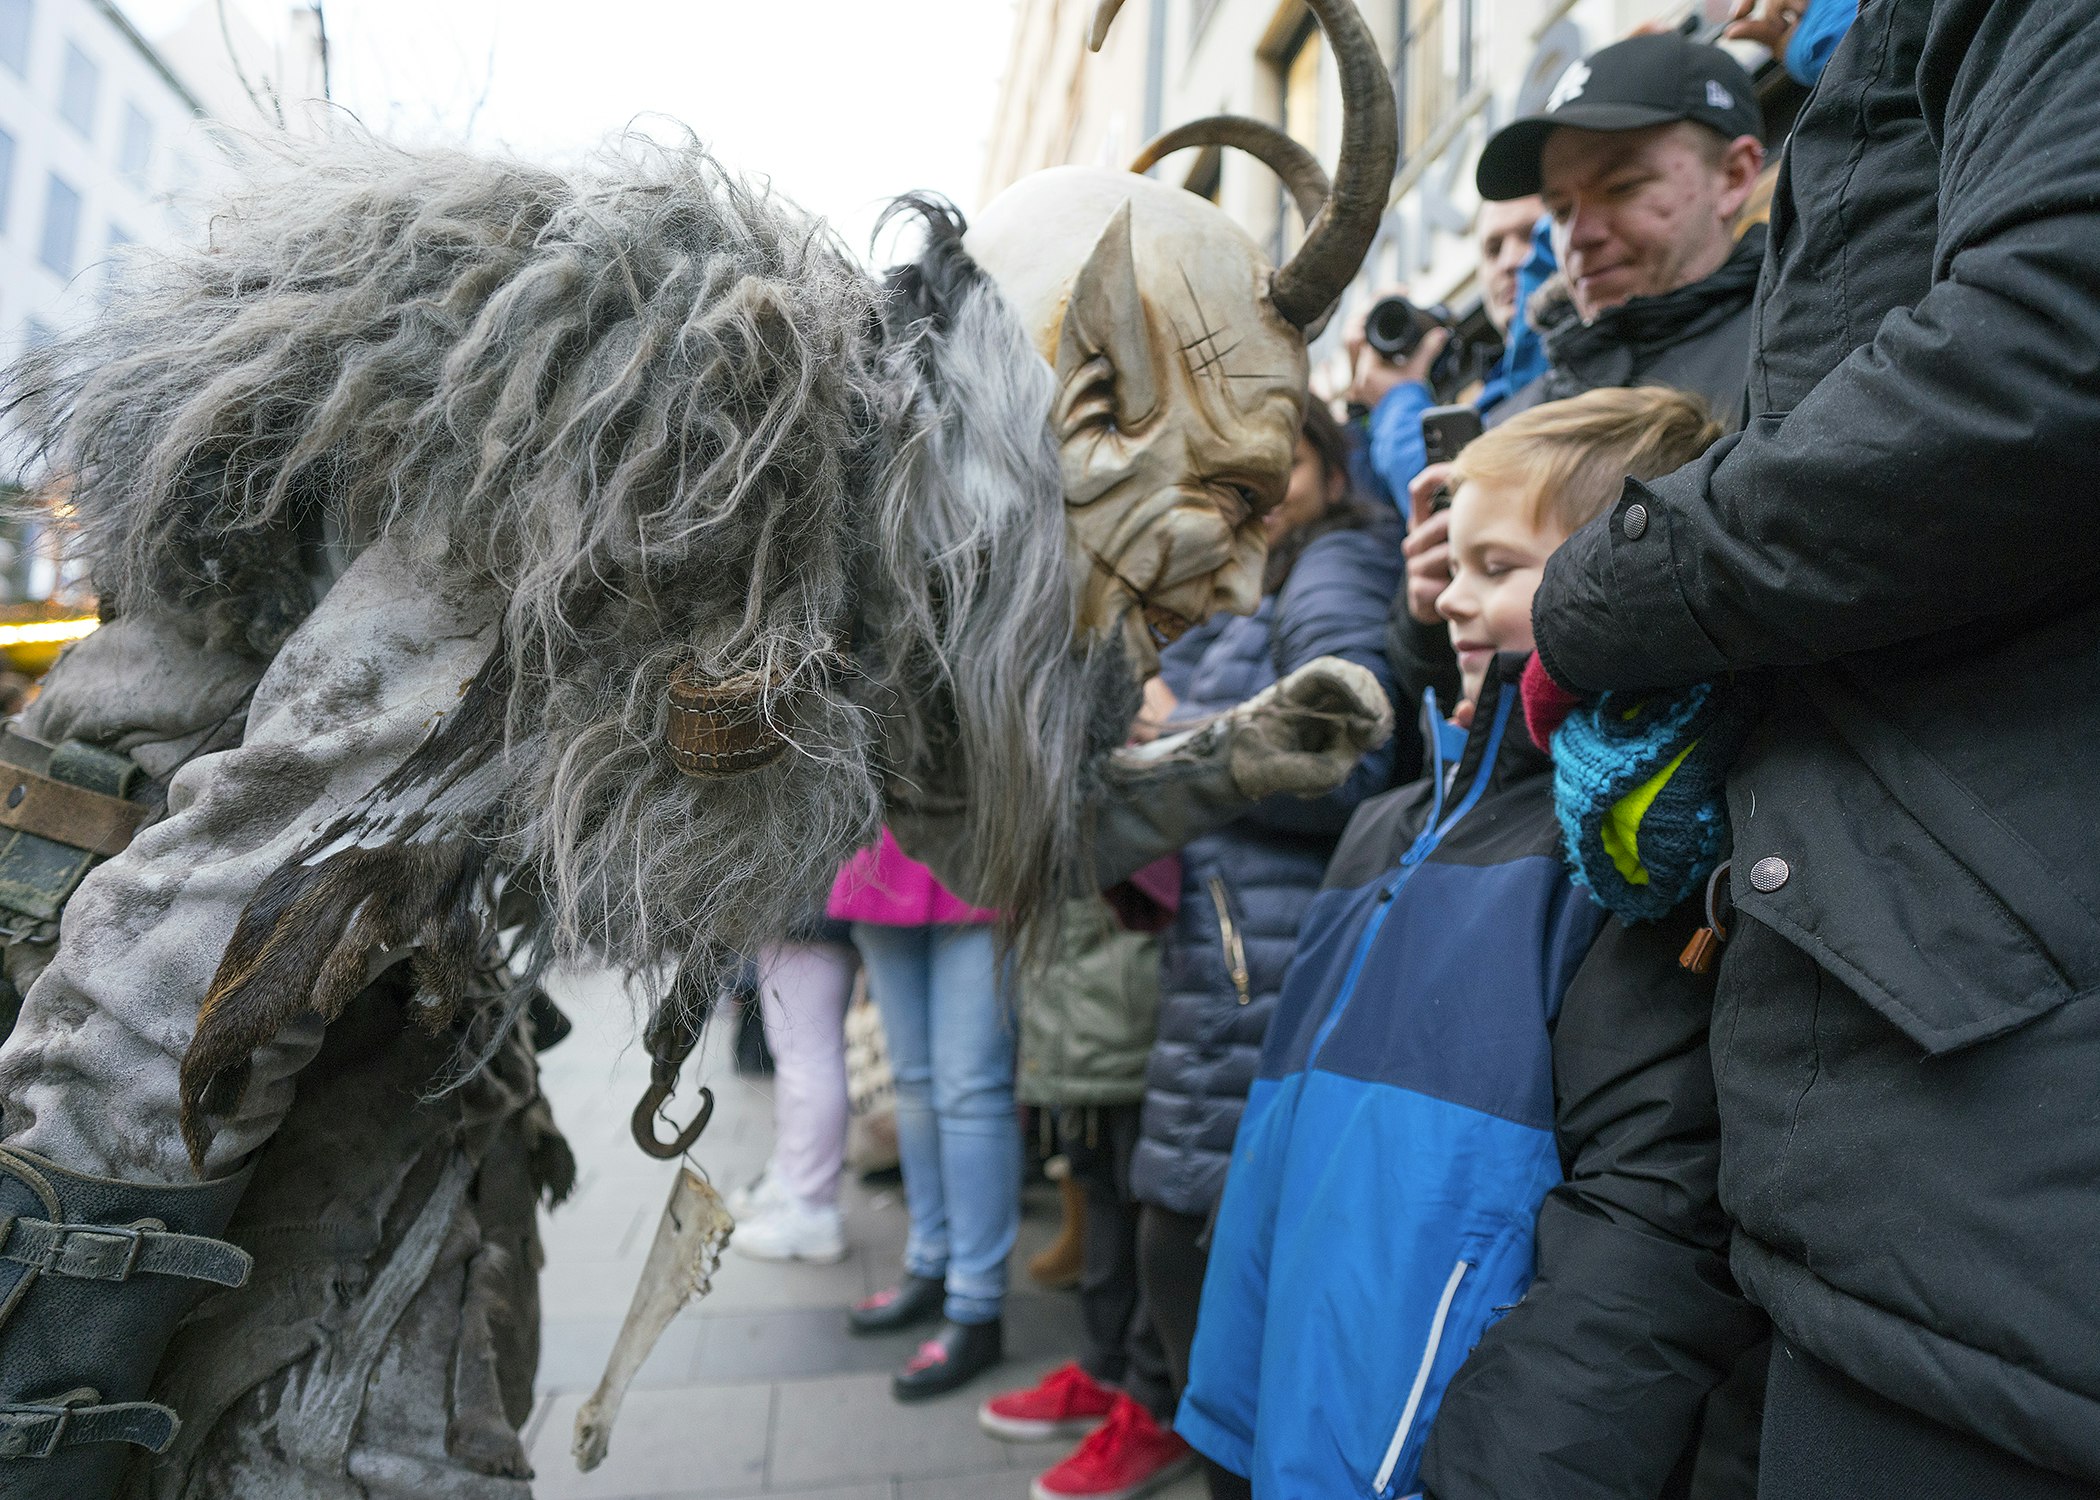 A Krampus character gets in the face of a child who smiles hesitantly back